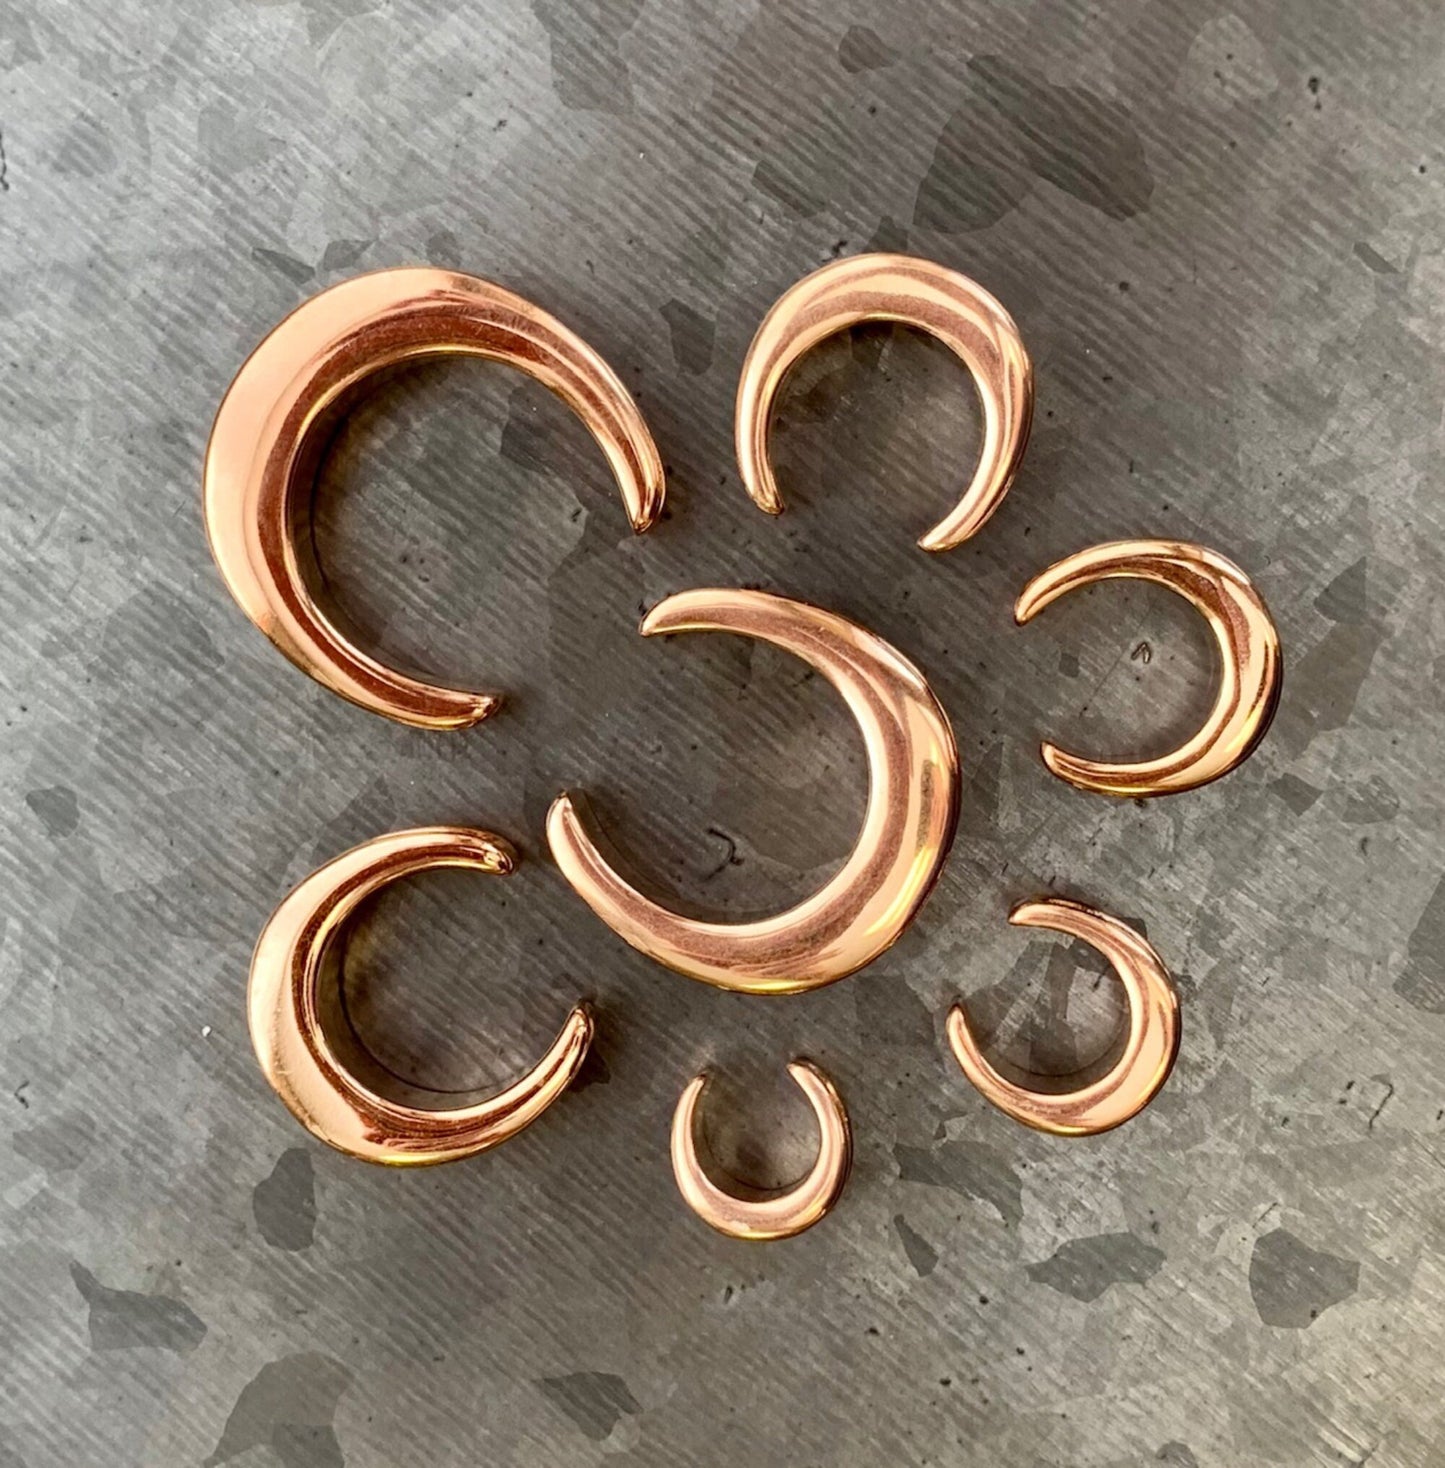 Pair of Beautiful Rose Gold Saddle Surgical Steel Ear Spreaders Hanger-Tunnels/Plugs - Gauges 00g (10mm) thru 1" (25mm) available!